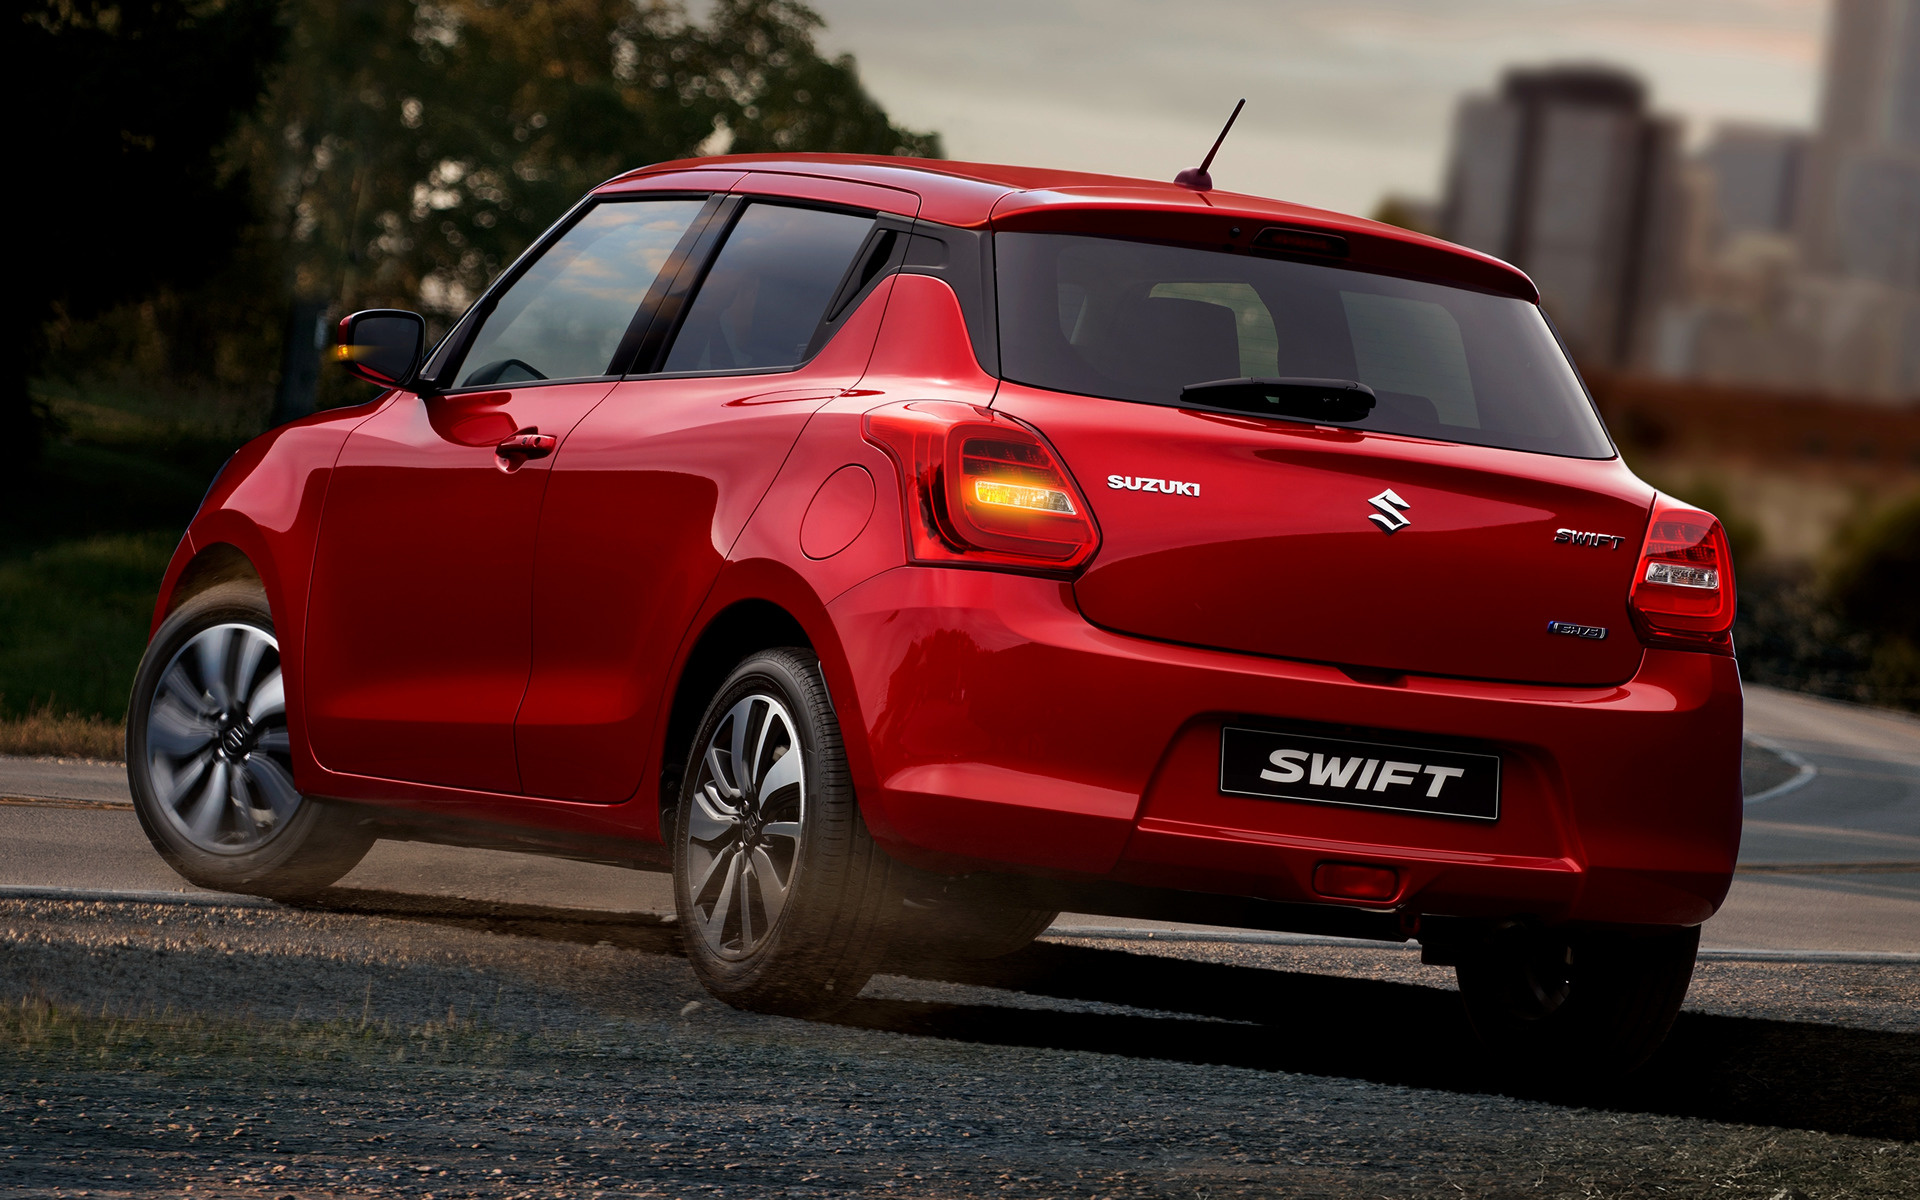 2017 Suzuki Swift - Wallpapers and HD Images | Car Pixel